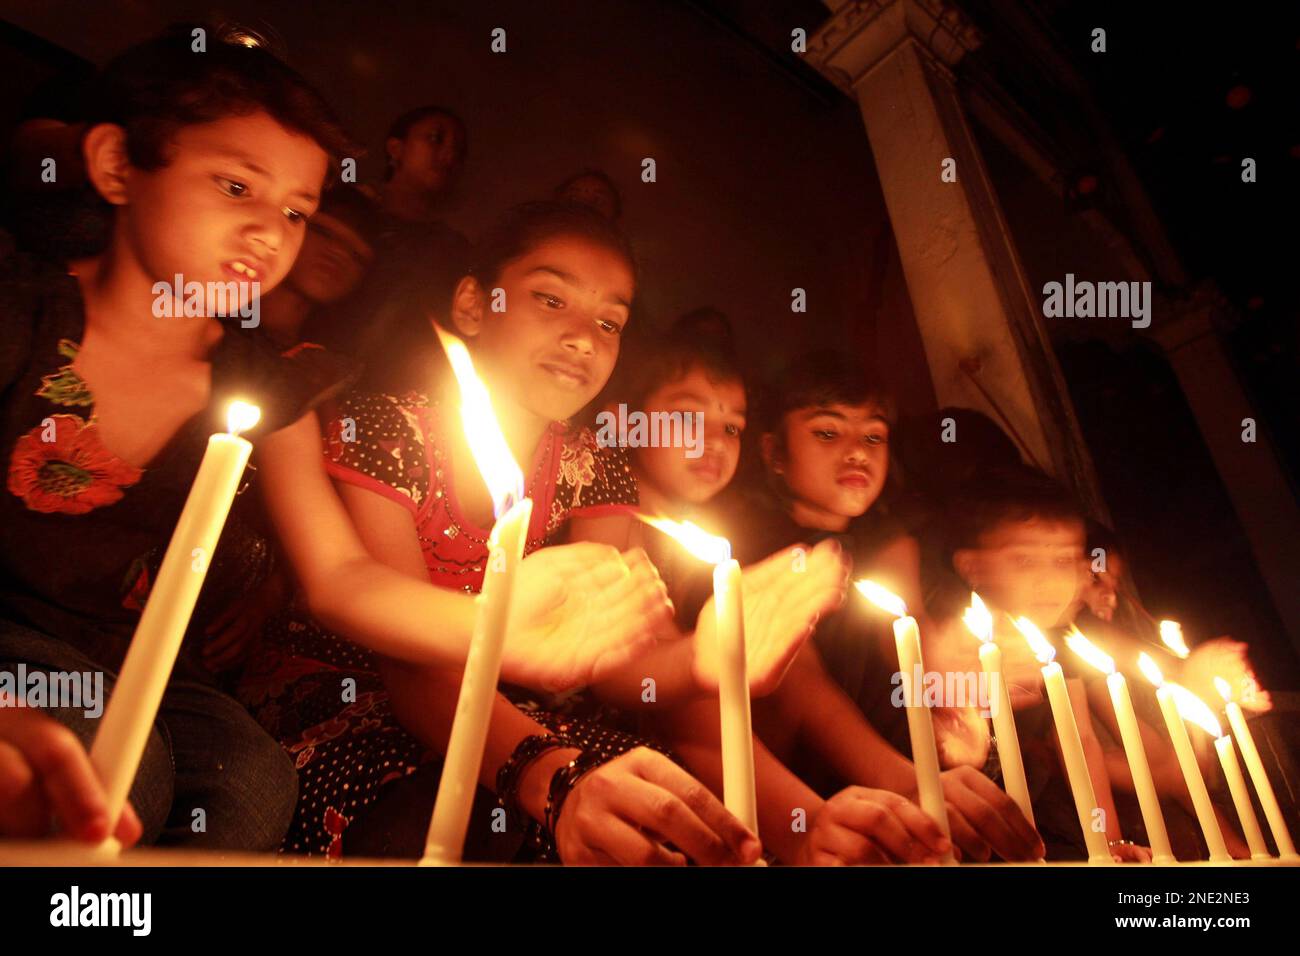 Bangladeshi children light candles in remembrance of their country's independence war heroes, in Dhaka, Bangladesh, Thursday, March 25, 2010. Bangladesh will celebrate its 39th Independence Day Friday. (AP Photo/Pavel Rahman) Stock Photo